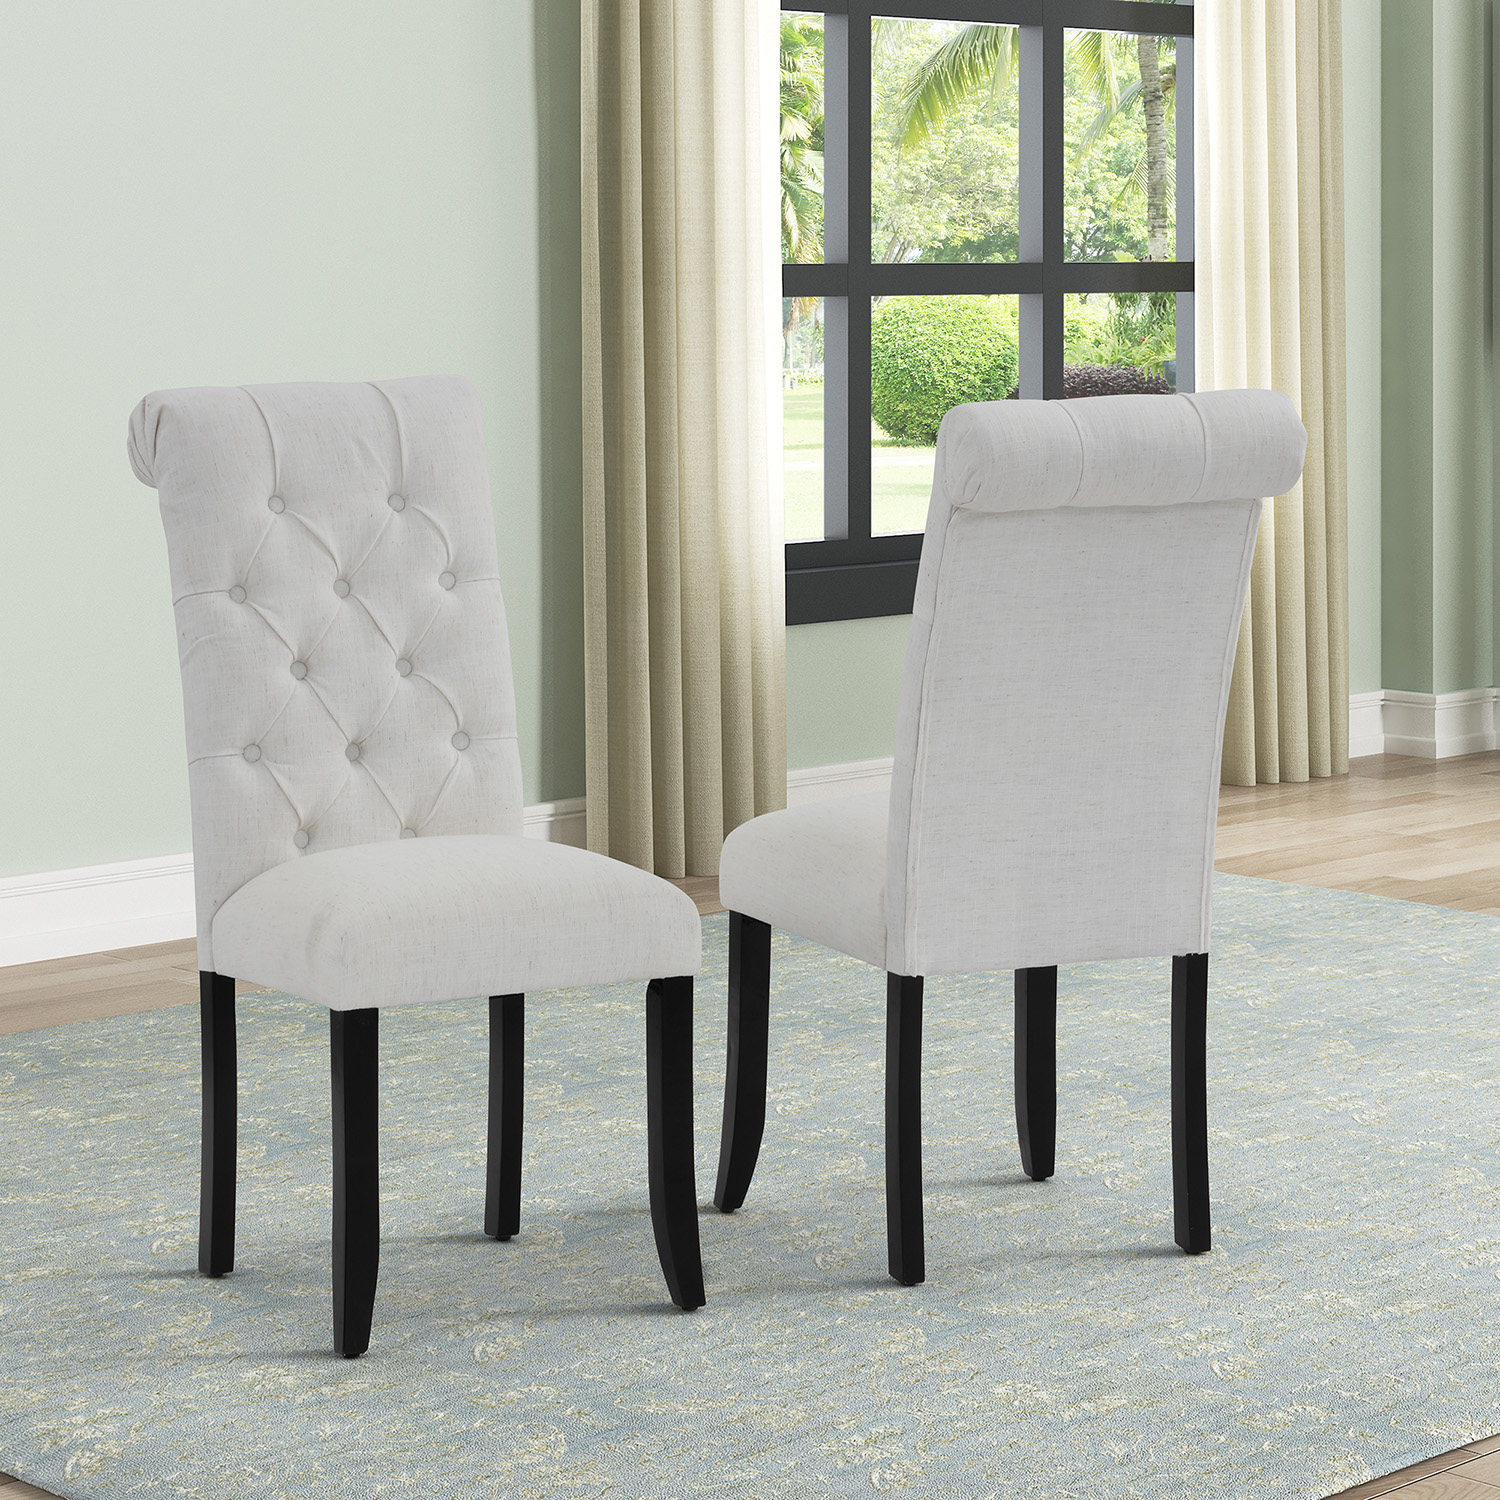 Classic Fabric Tufted Dining Chair with Wooden Legs - Set of 2-Boyel Living